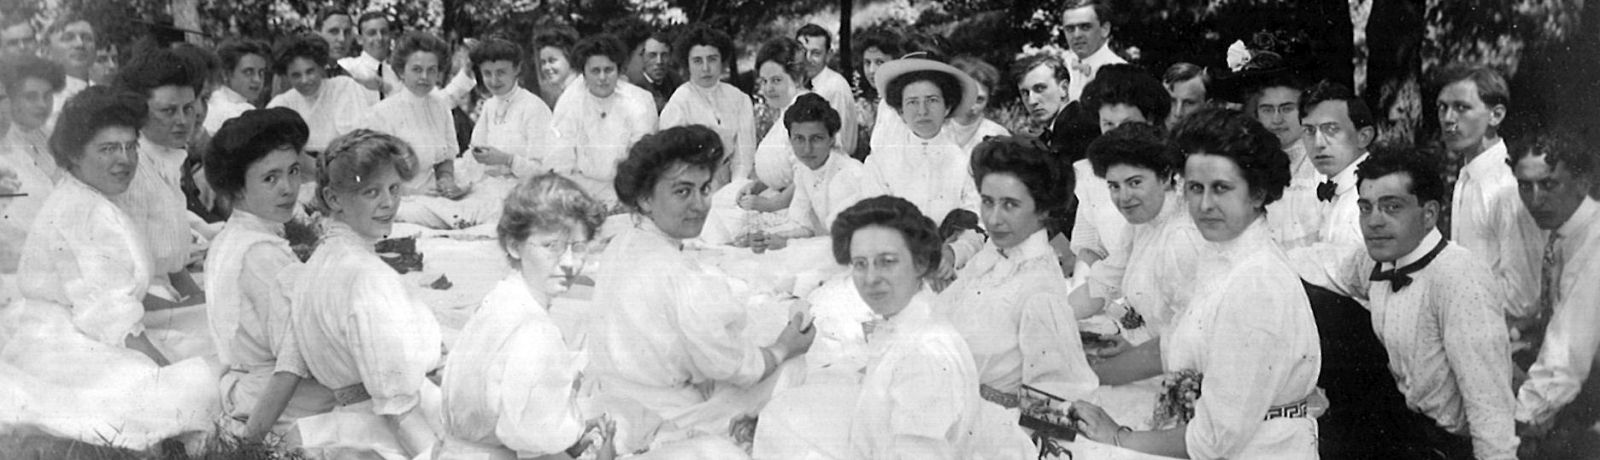 group of young jewish women